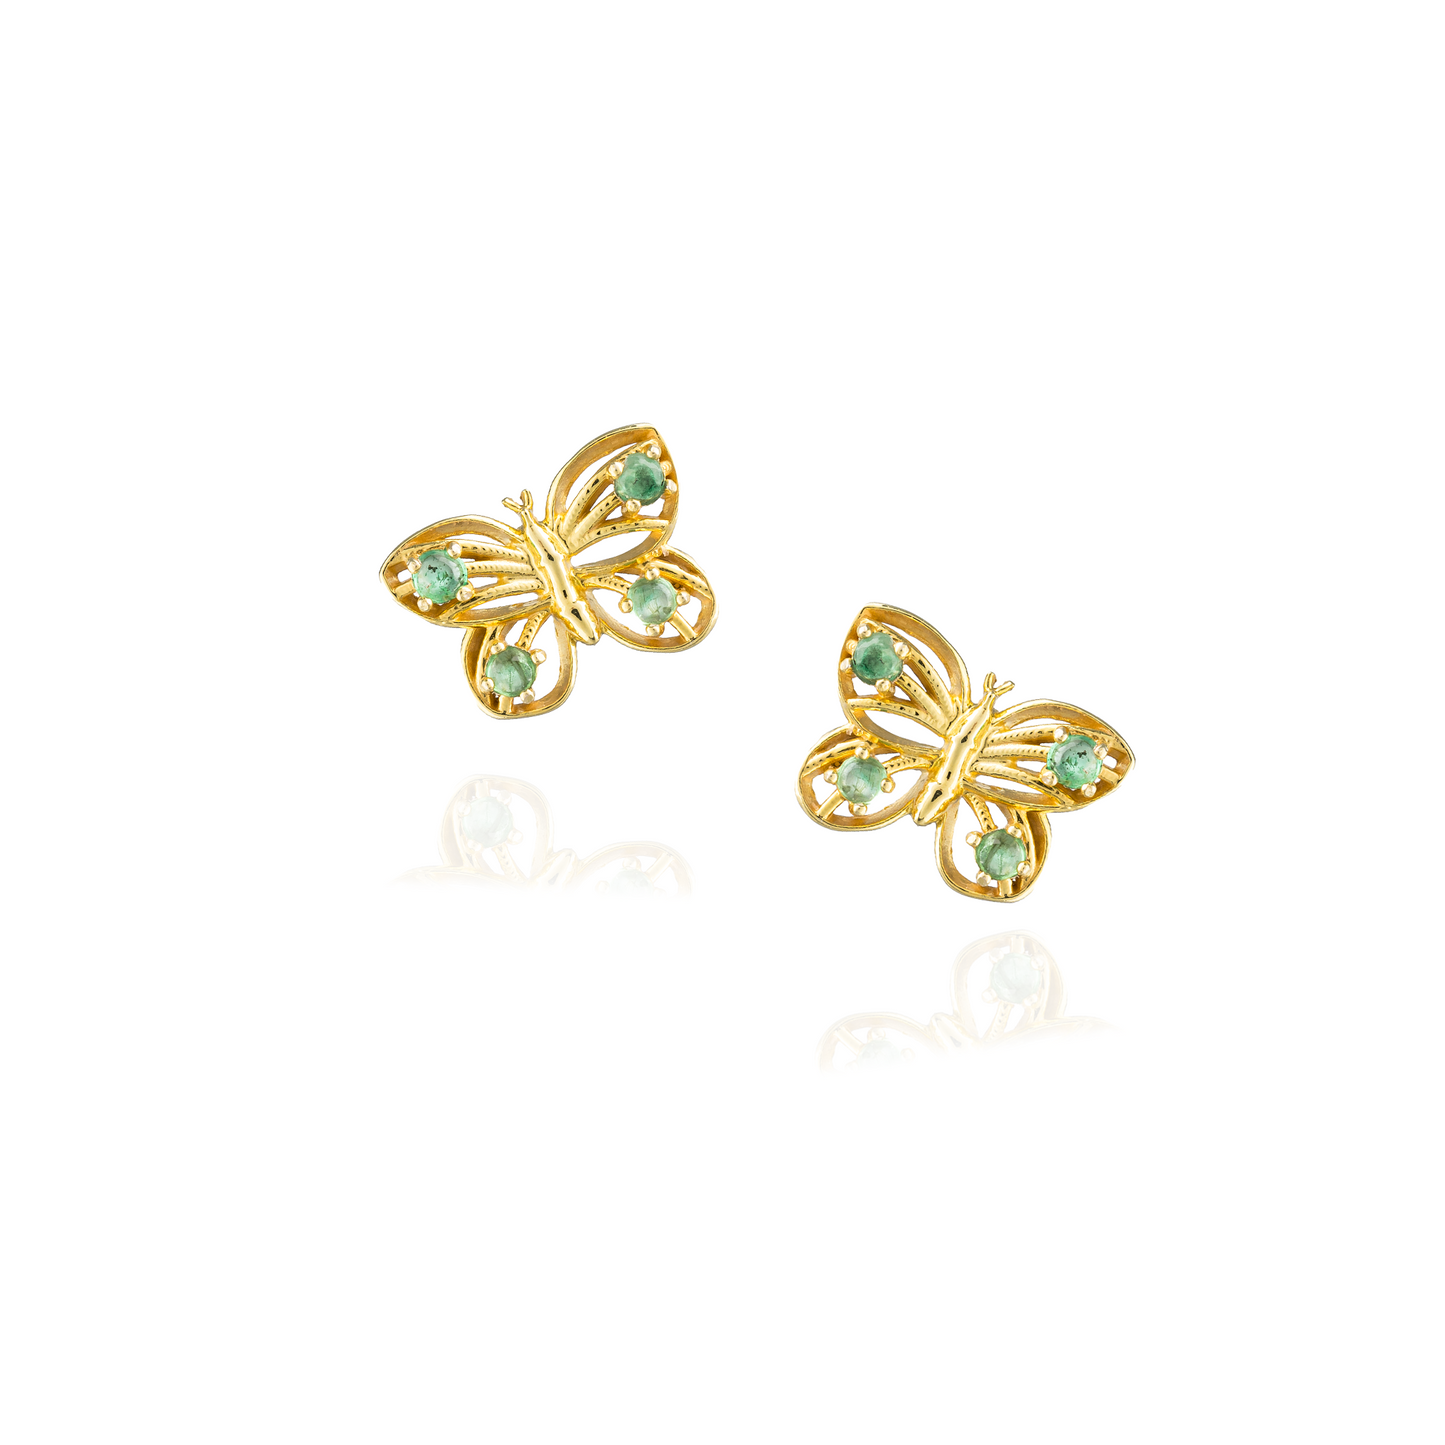 925 Silver Gold Plated 18KT Earrings with Emerald